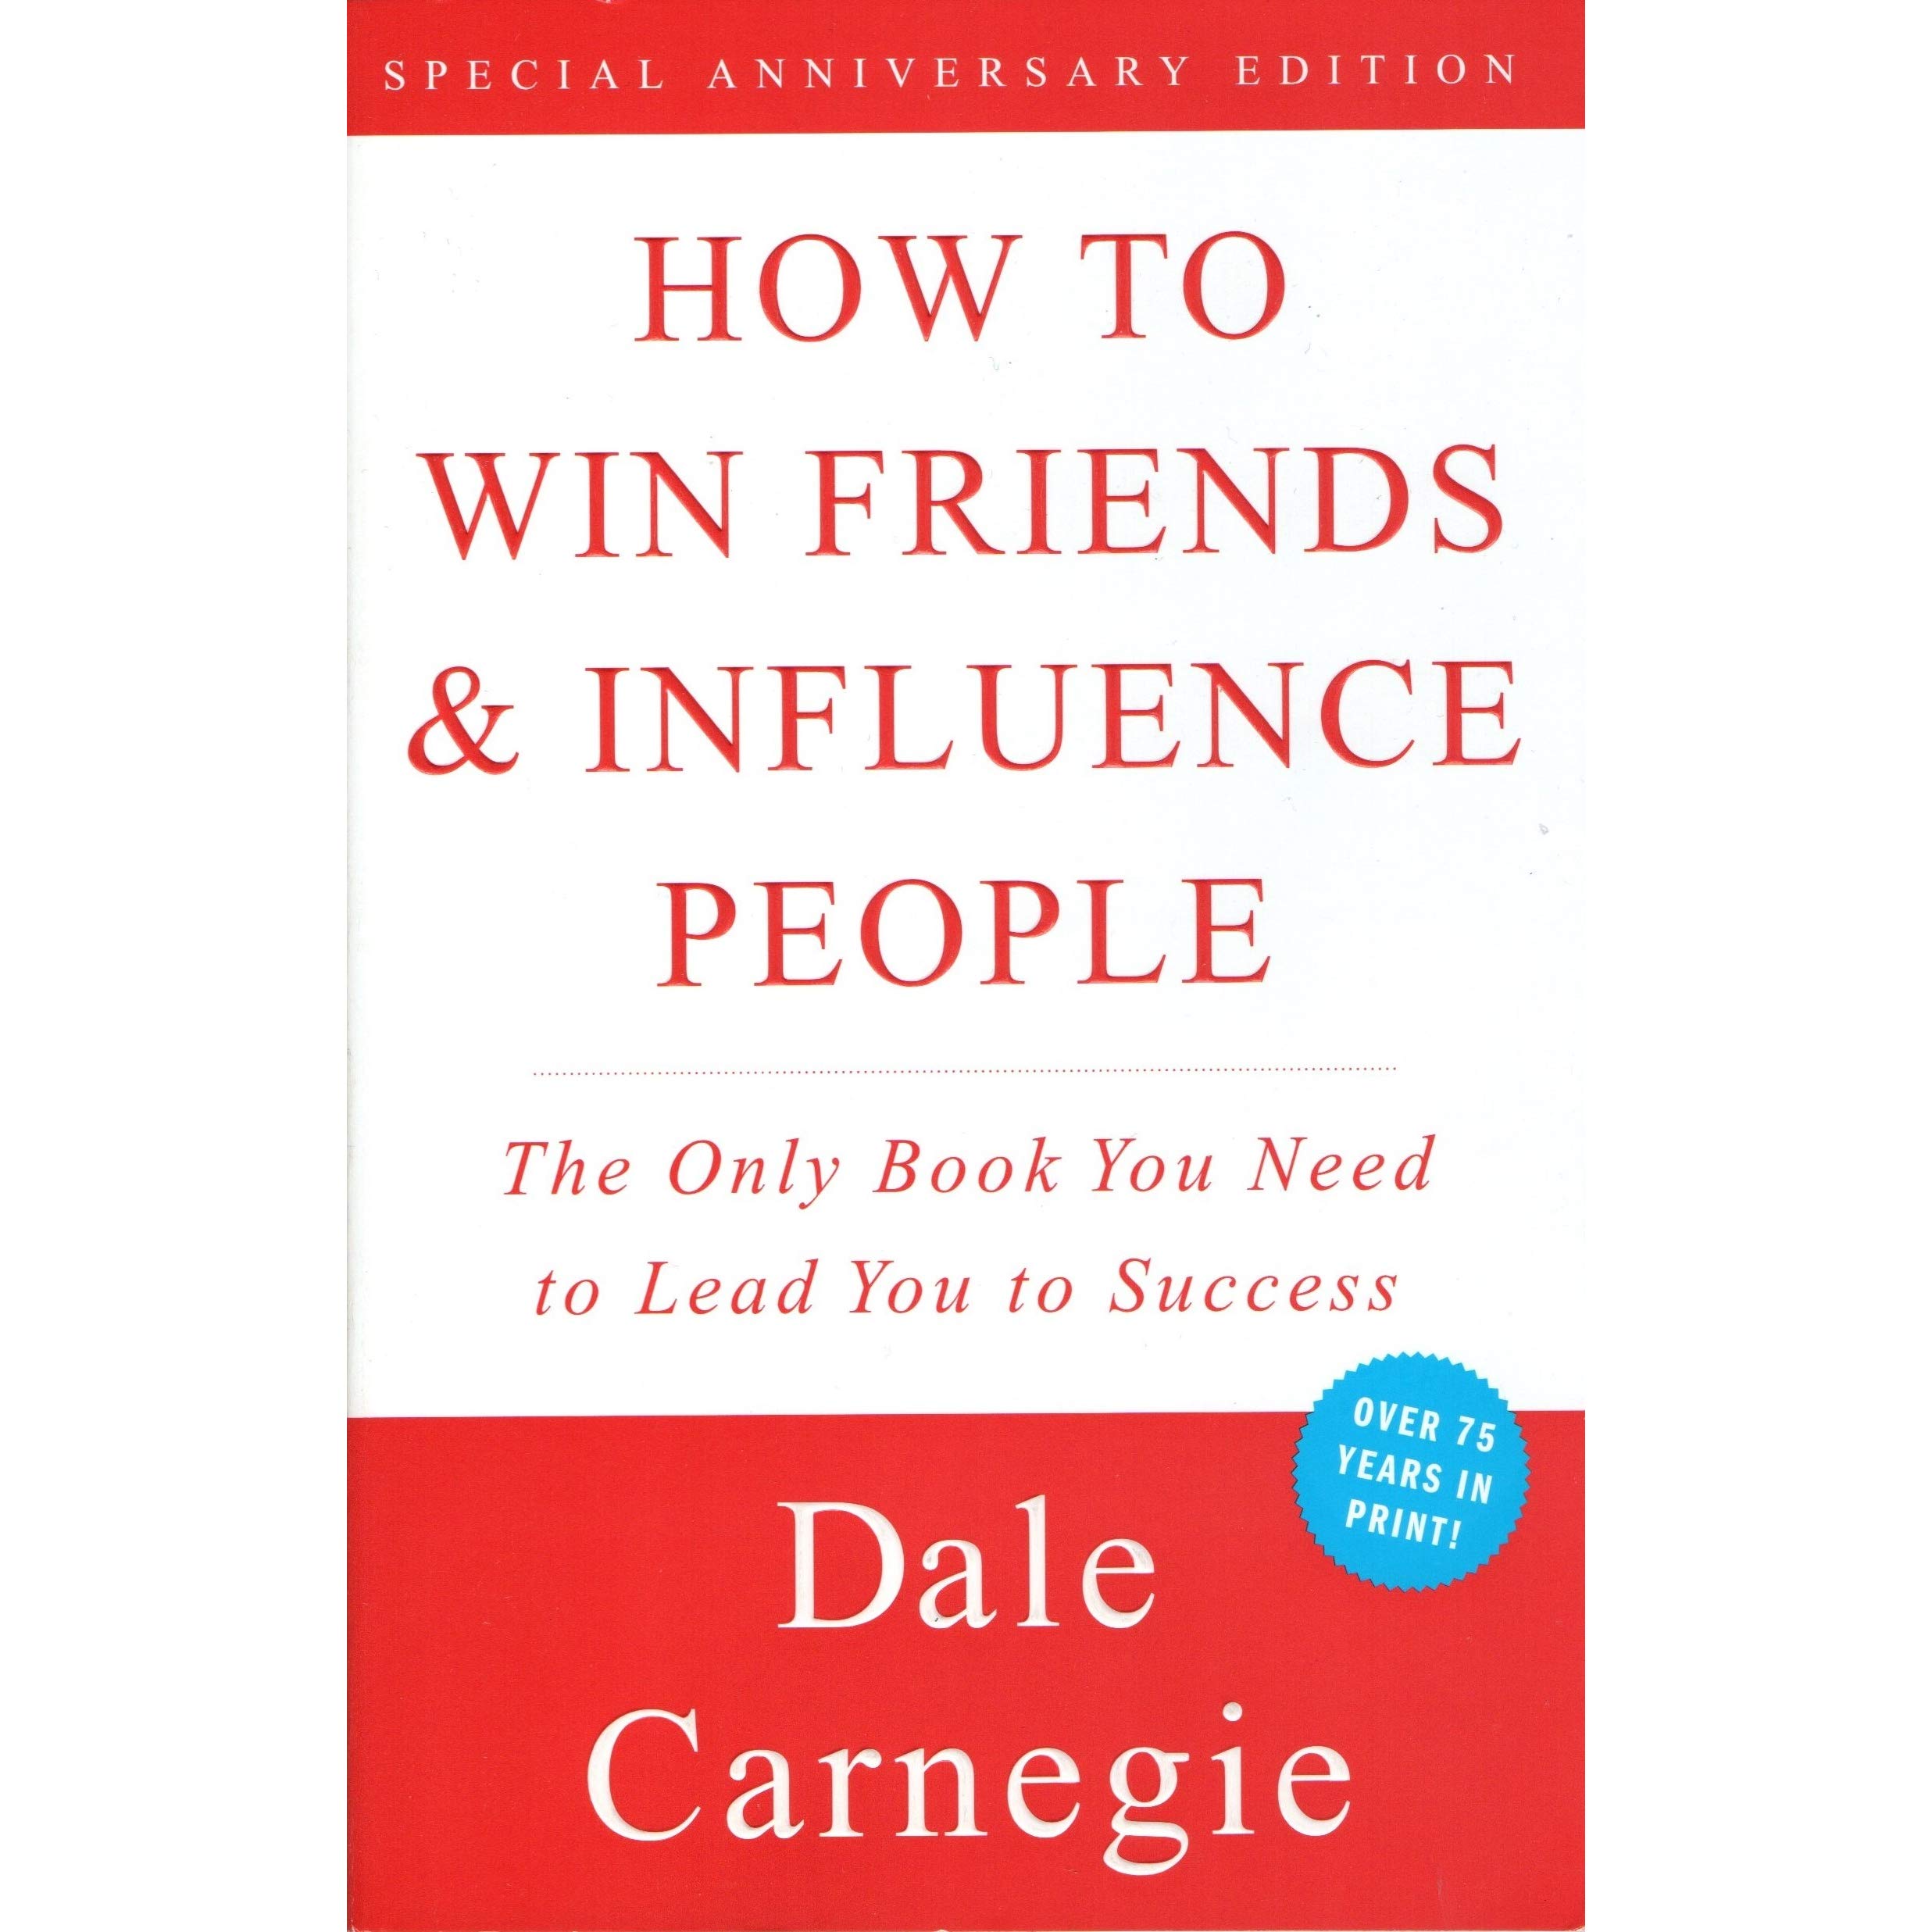 How To Win Friends And Influence People Summary